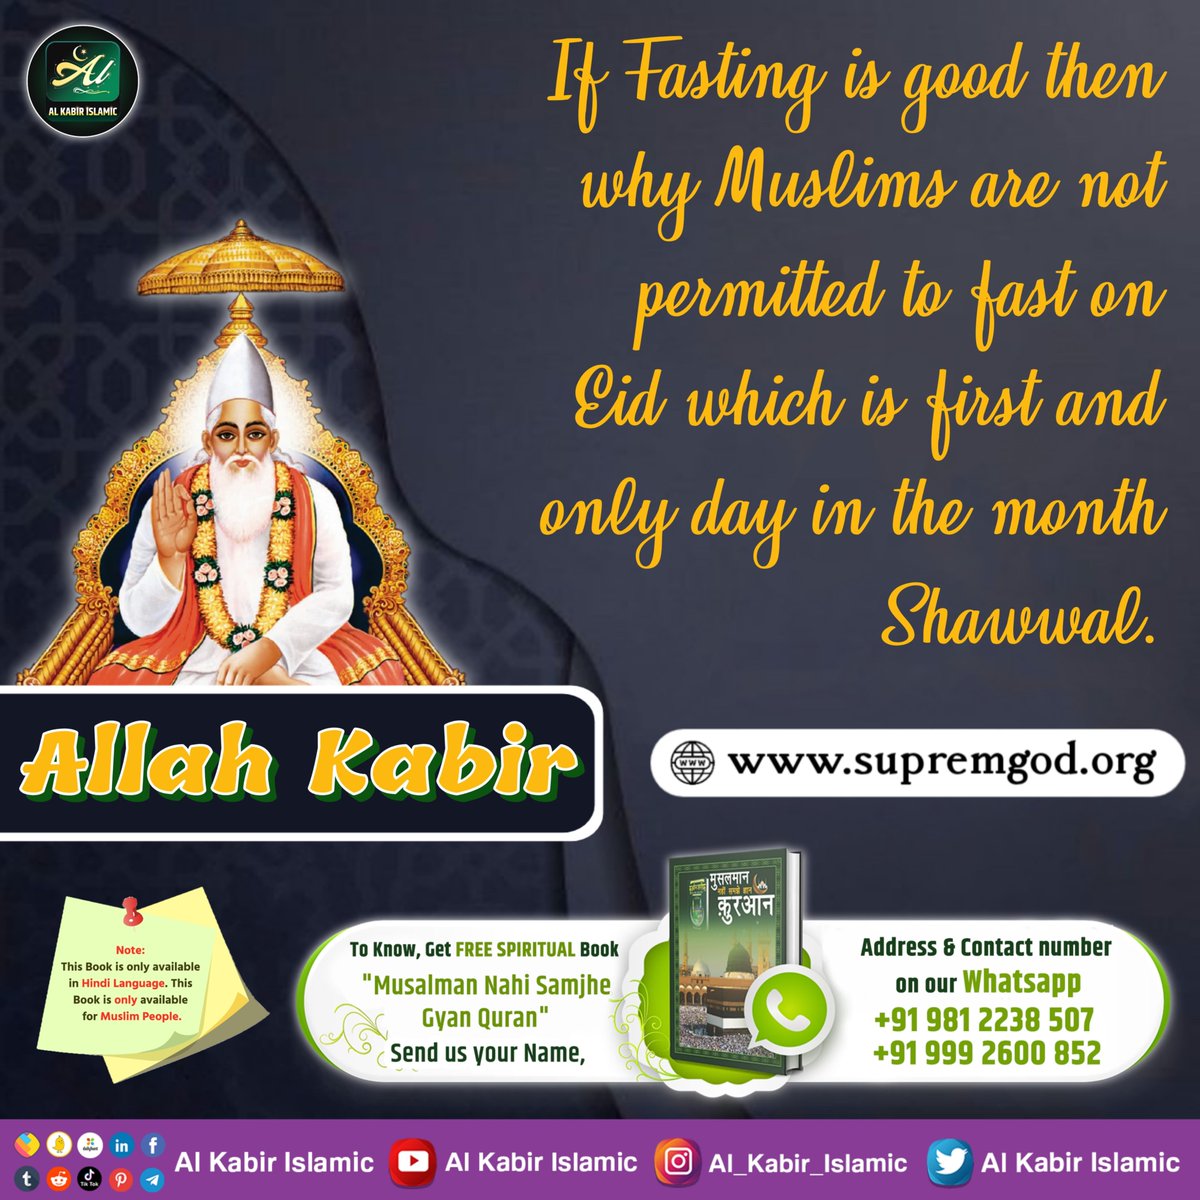 If Fasting is good then why Muslims are not permitted to fast on Eid which is first and only day in the month Shawwal? #AlKabir_Islamic #SaintRampalJi